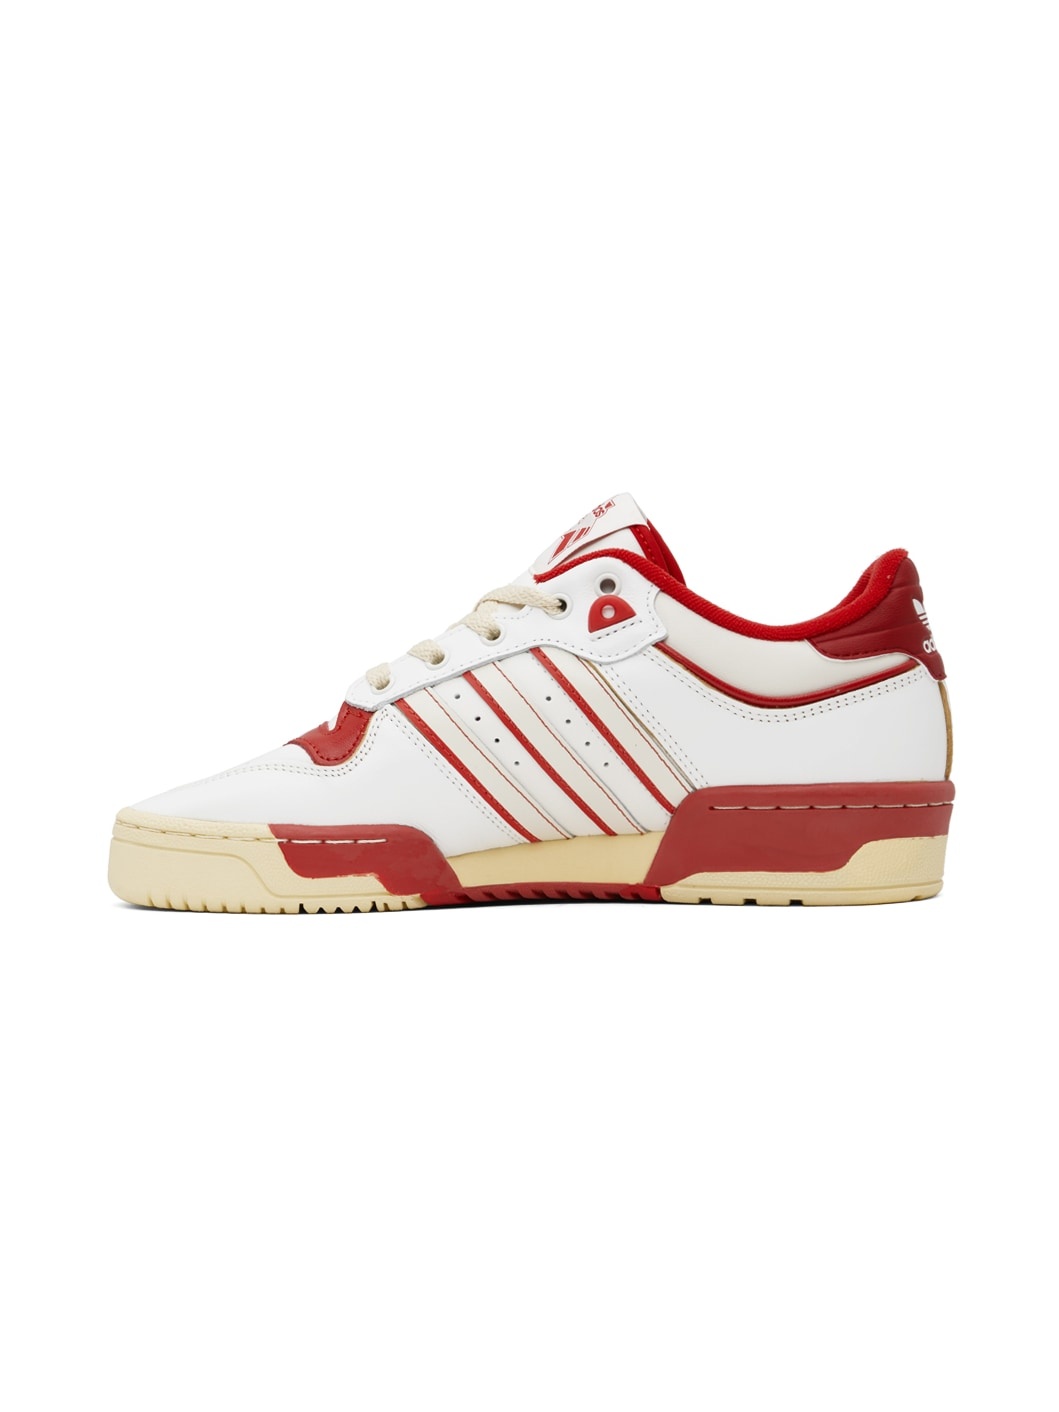 White & Red Rivalry Low 86 Sneakers - 3